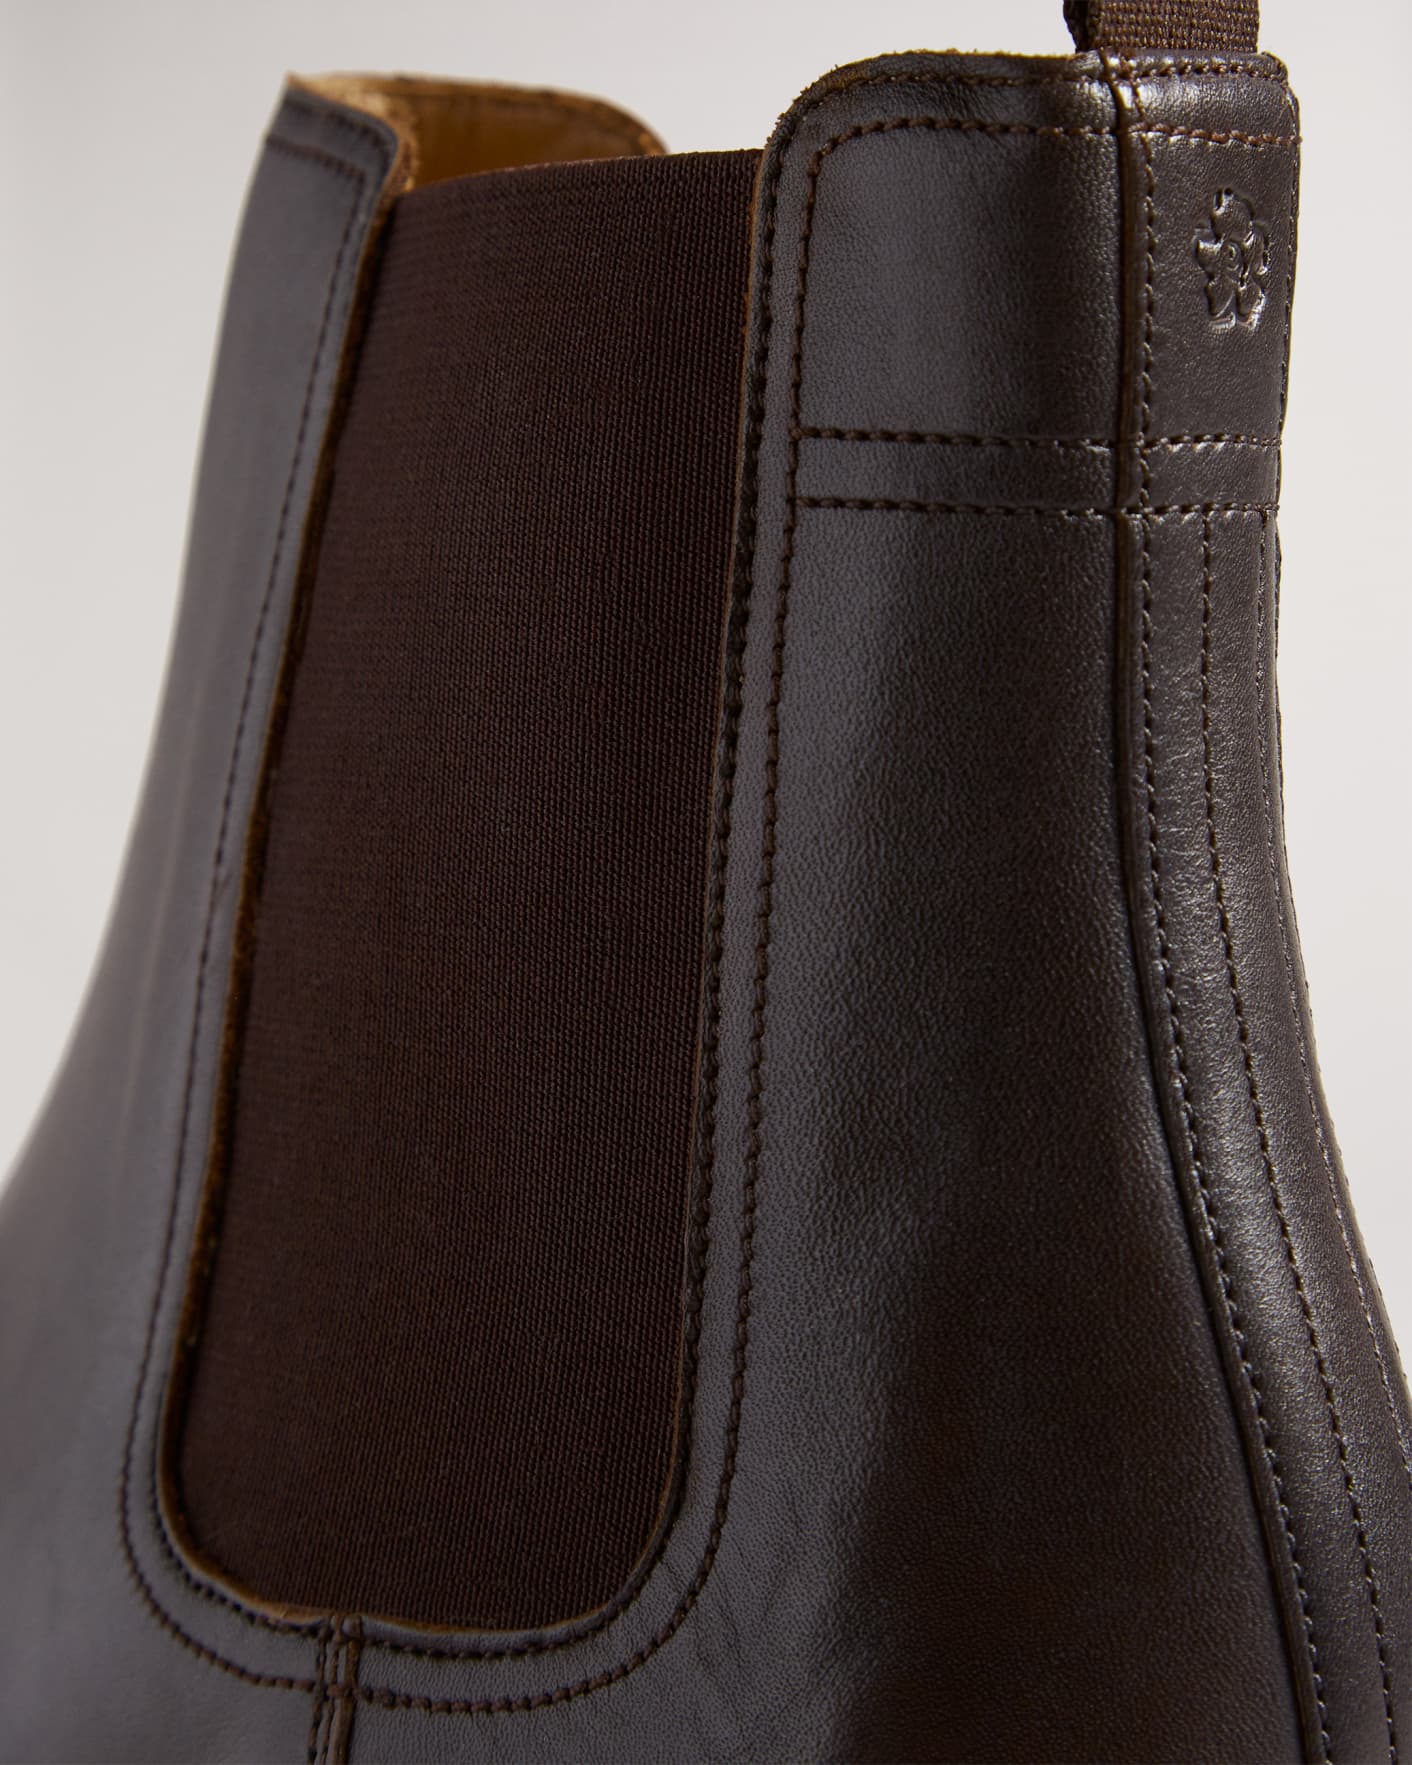 Brown Leather Chelsea Boots Ted Baker